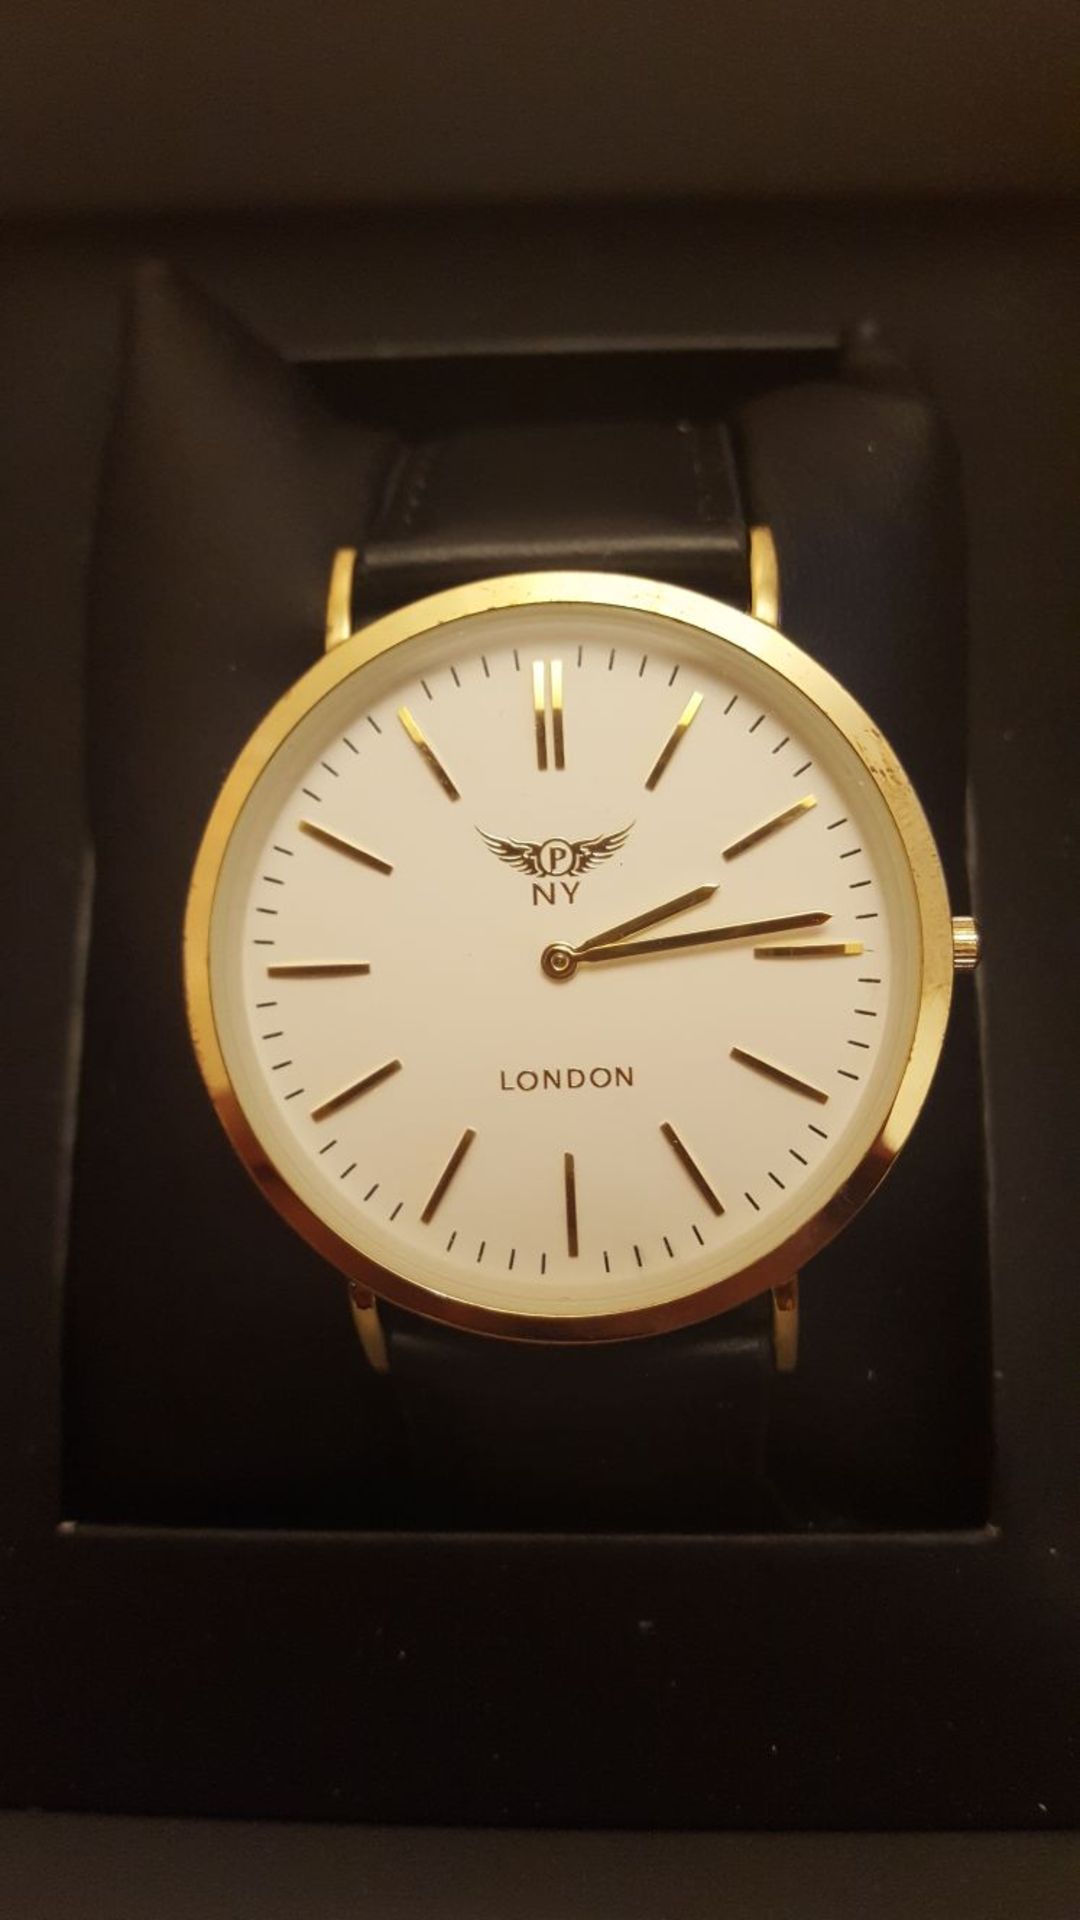 ** TRADE LOT ** BRAND NEW GENTS NY LONDON SLIMLINE WATCHES, VARIOUS COLOURS - 6 WATCHES - Image 3 of 4